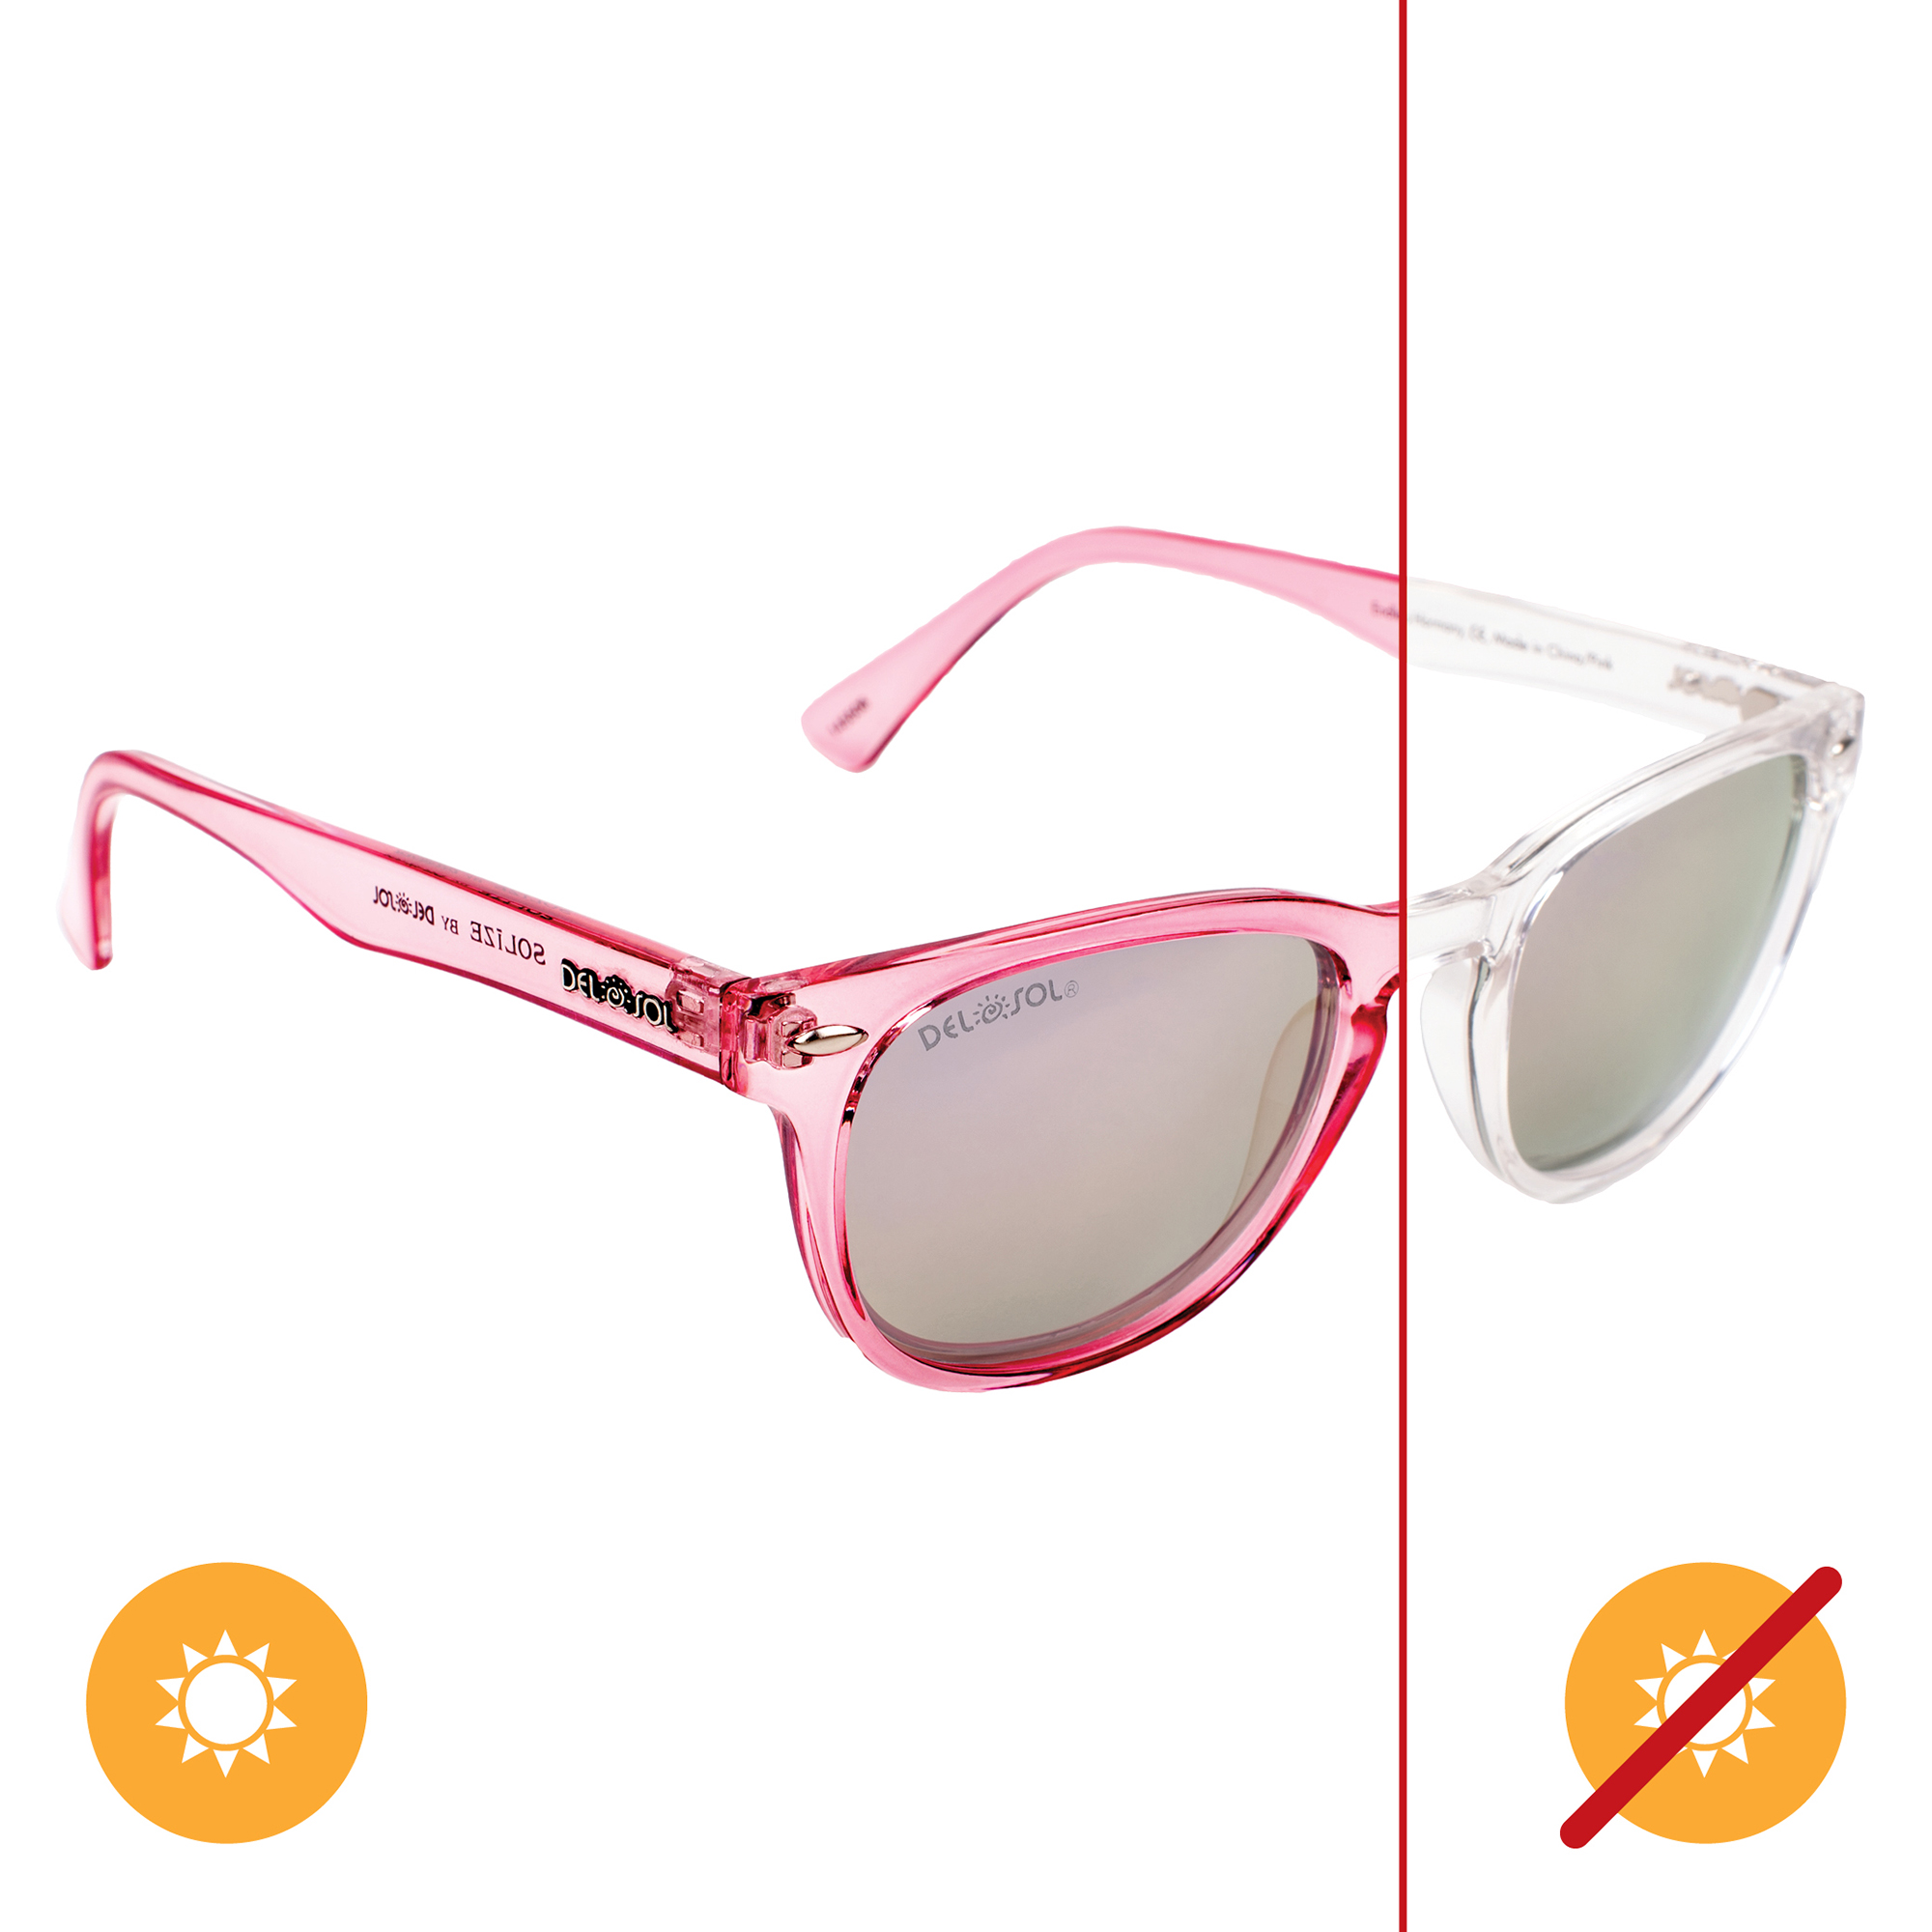 Del Sol Solize Endless Harmony - Clear-Pink for Women 1 Pc Sunglasses